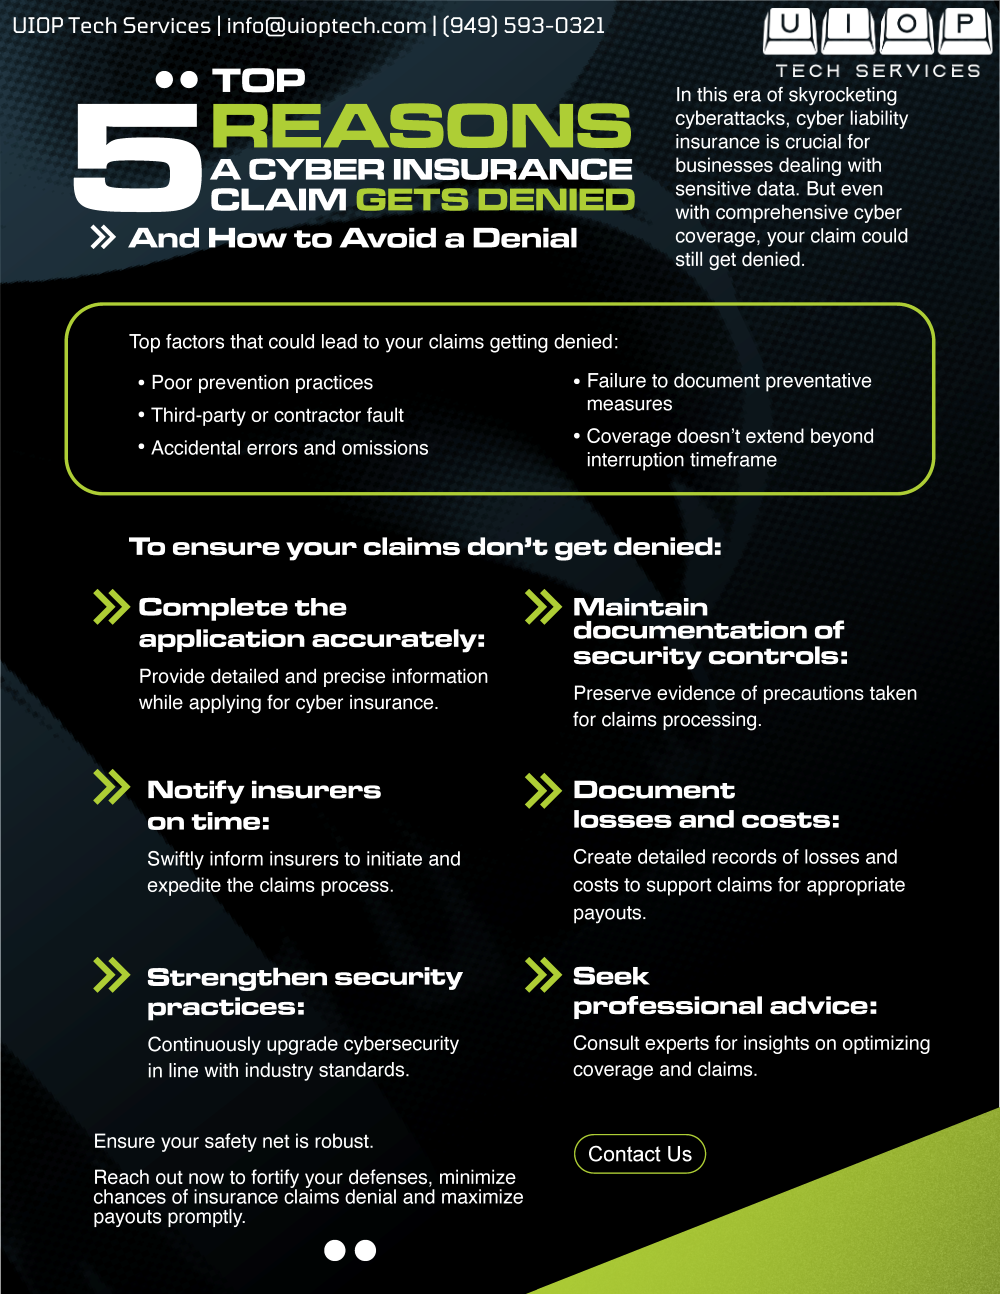 Infographic: Cyber Liability Insurance – Top Reasons Claims get Denied